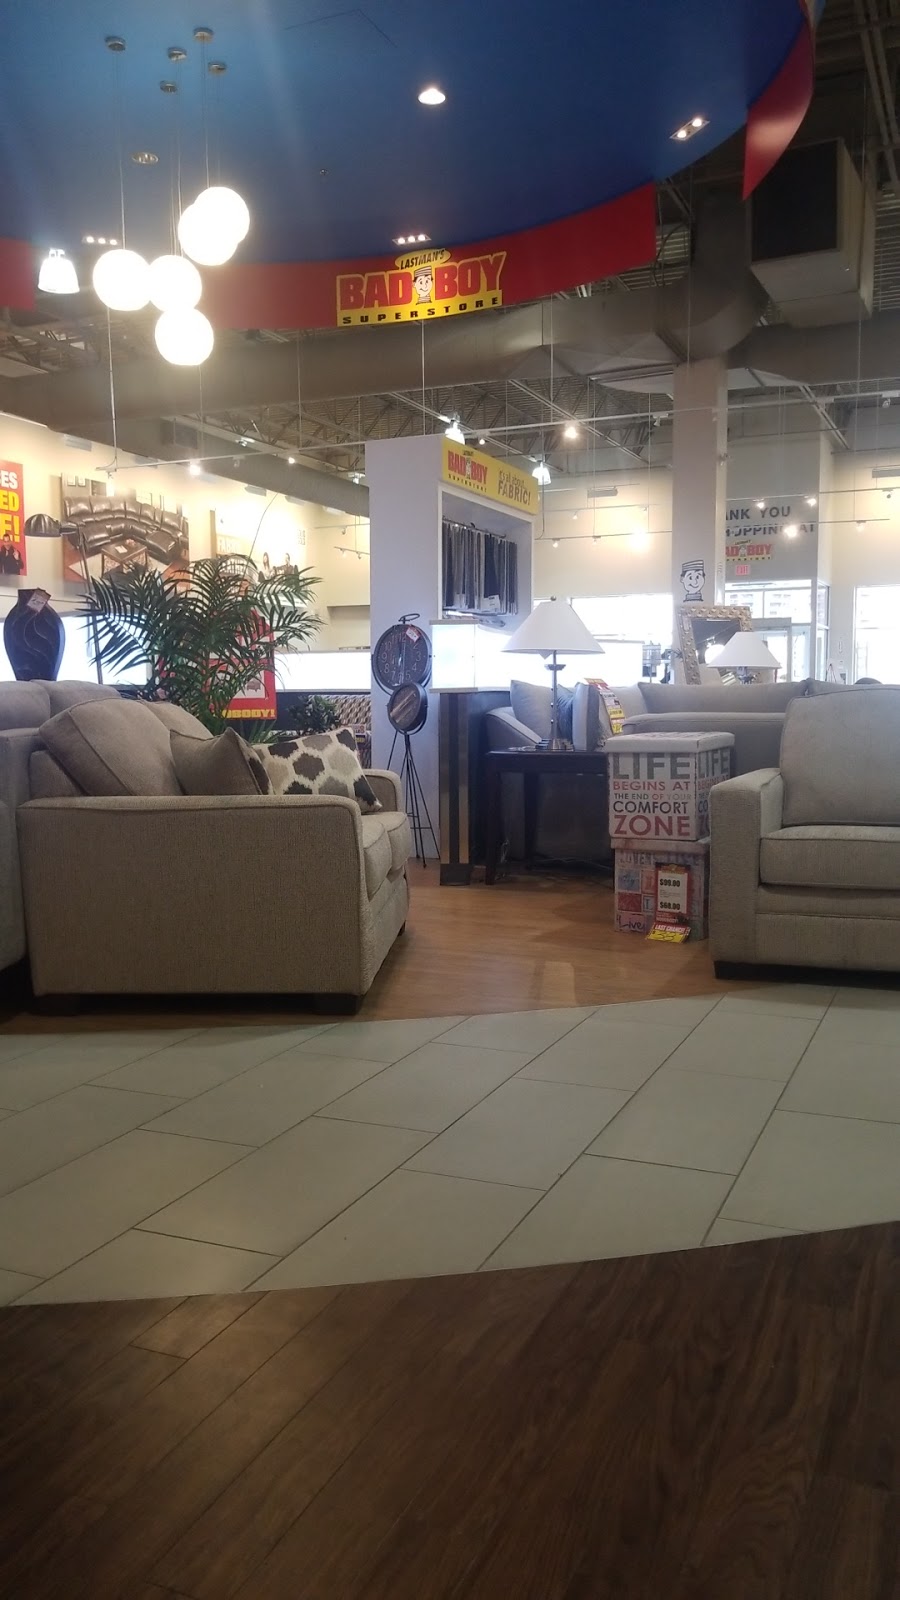 Lastmans Bad Boy | furniture store | 1615 Dundas St E, Whitby, ON L1N 7G3, Canada | 9055712555 OR +1 905-571-2555